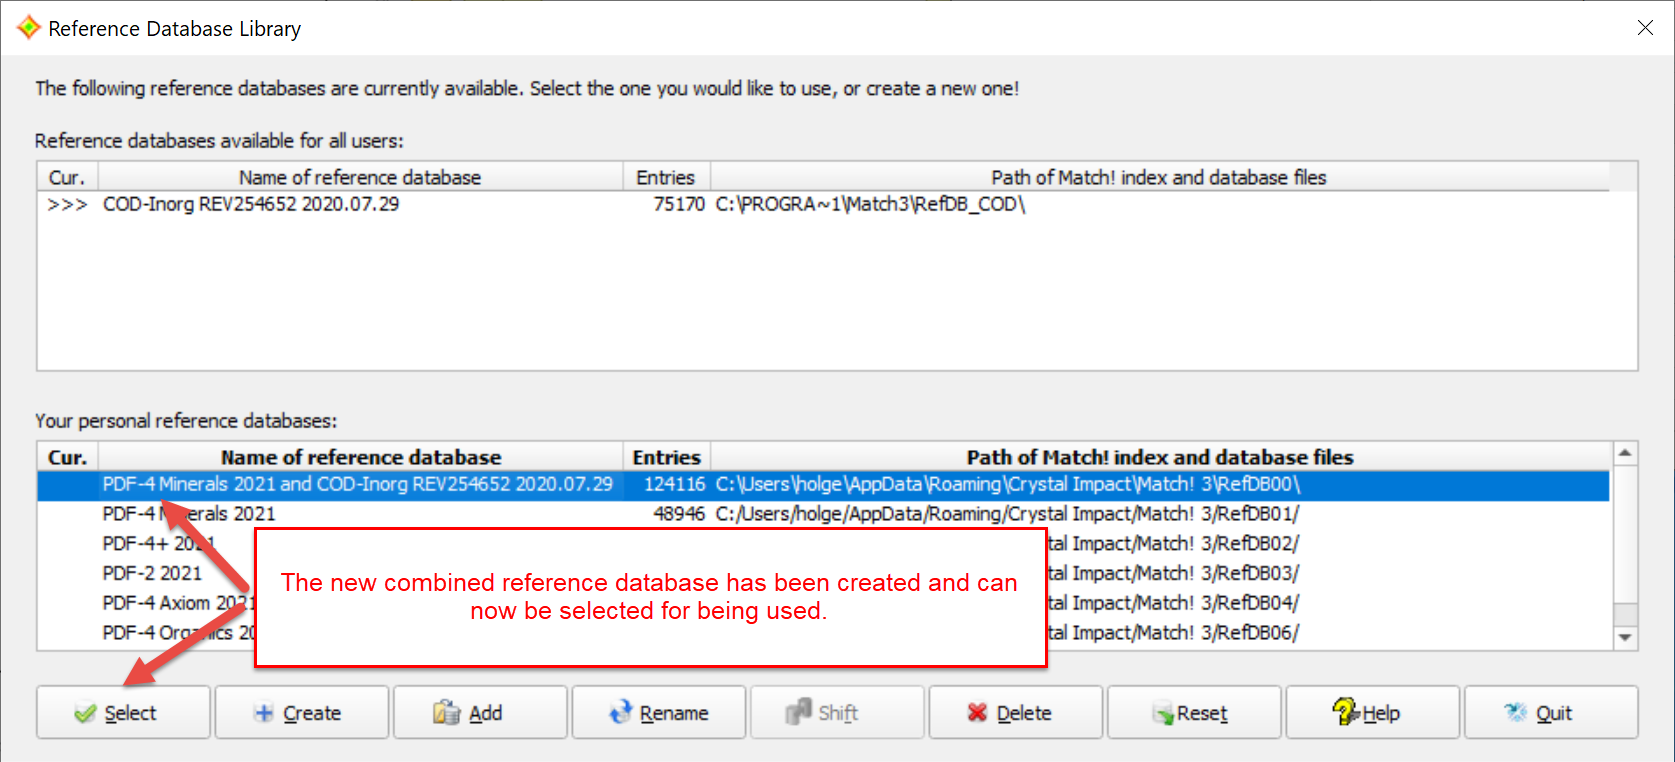 You can now select the new combined reference database for being used.